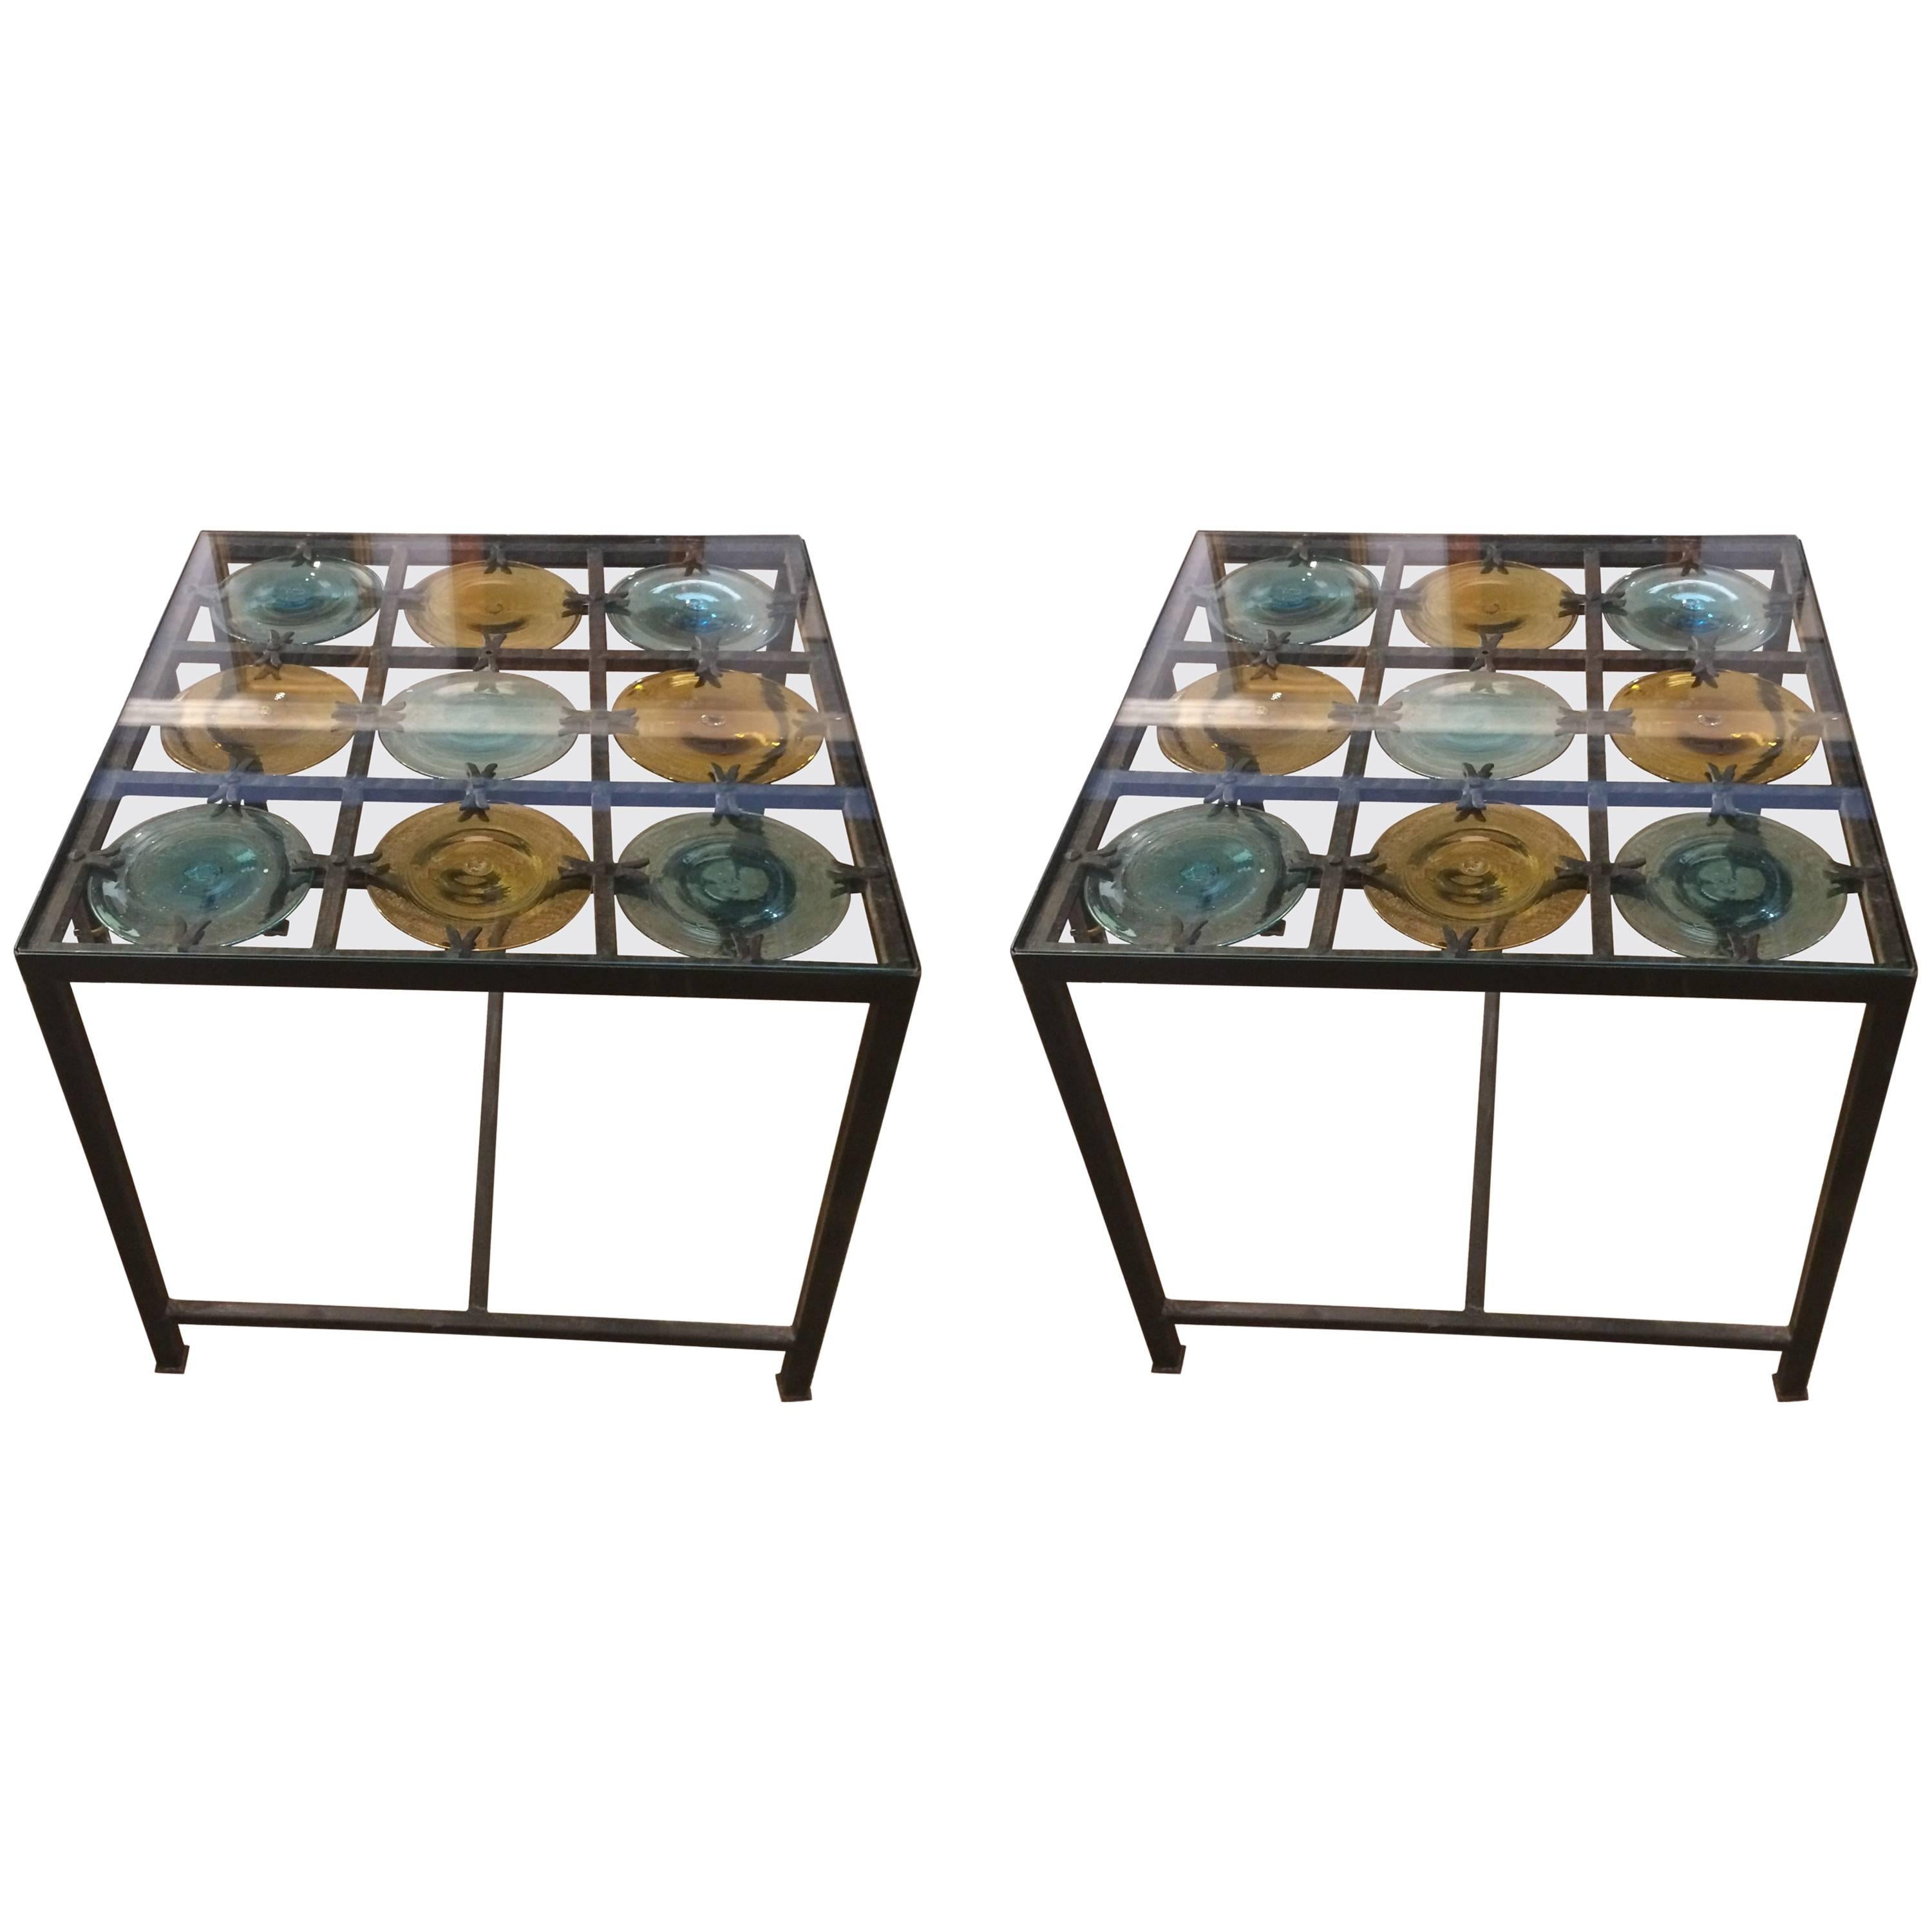 Sensational Pair of Spanish Side Tables with Handblown Glass Discs